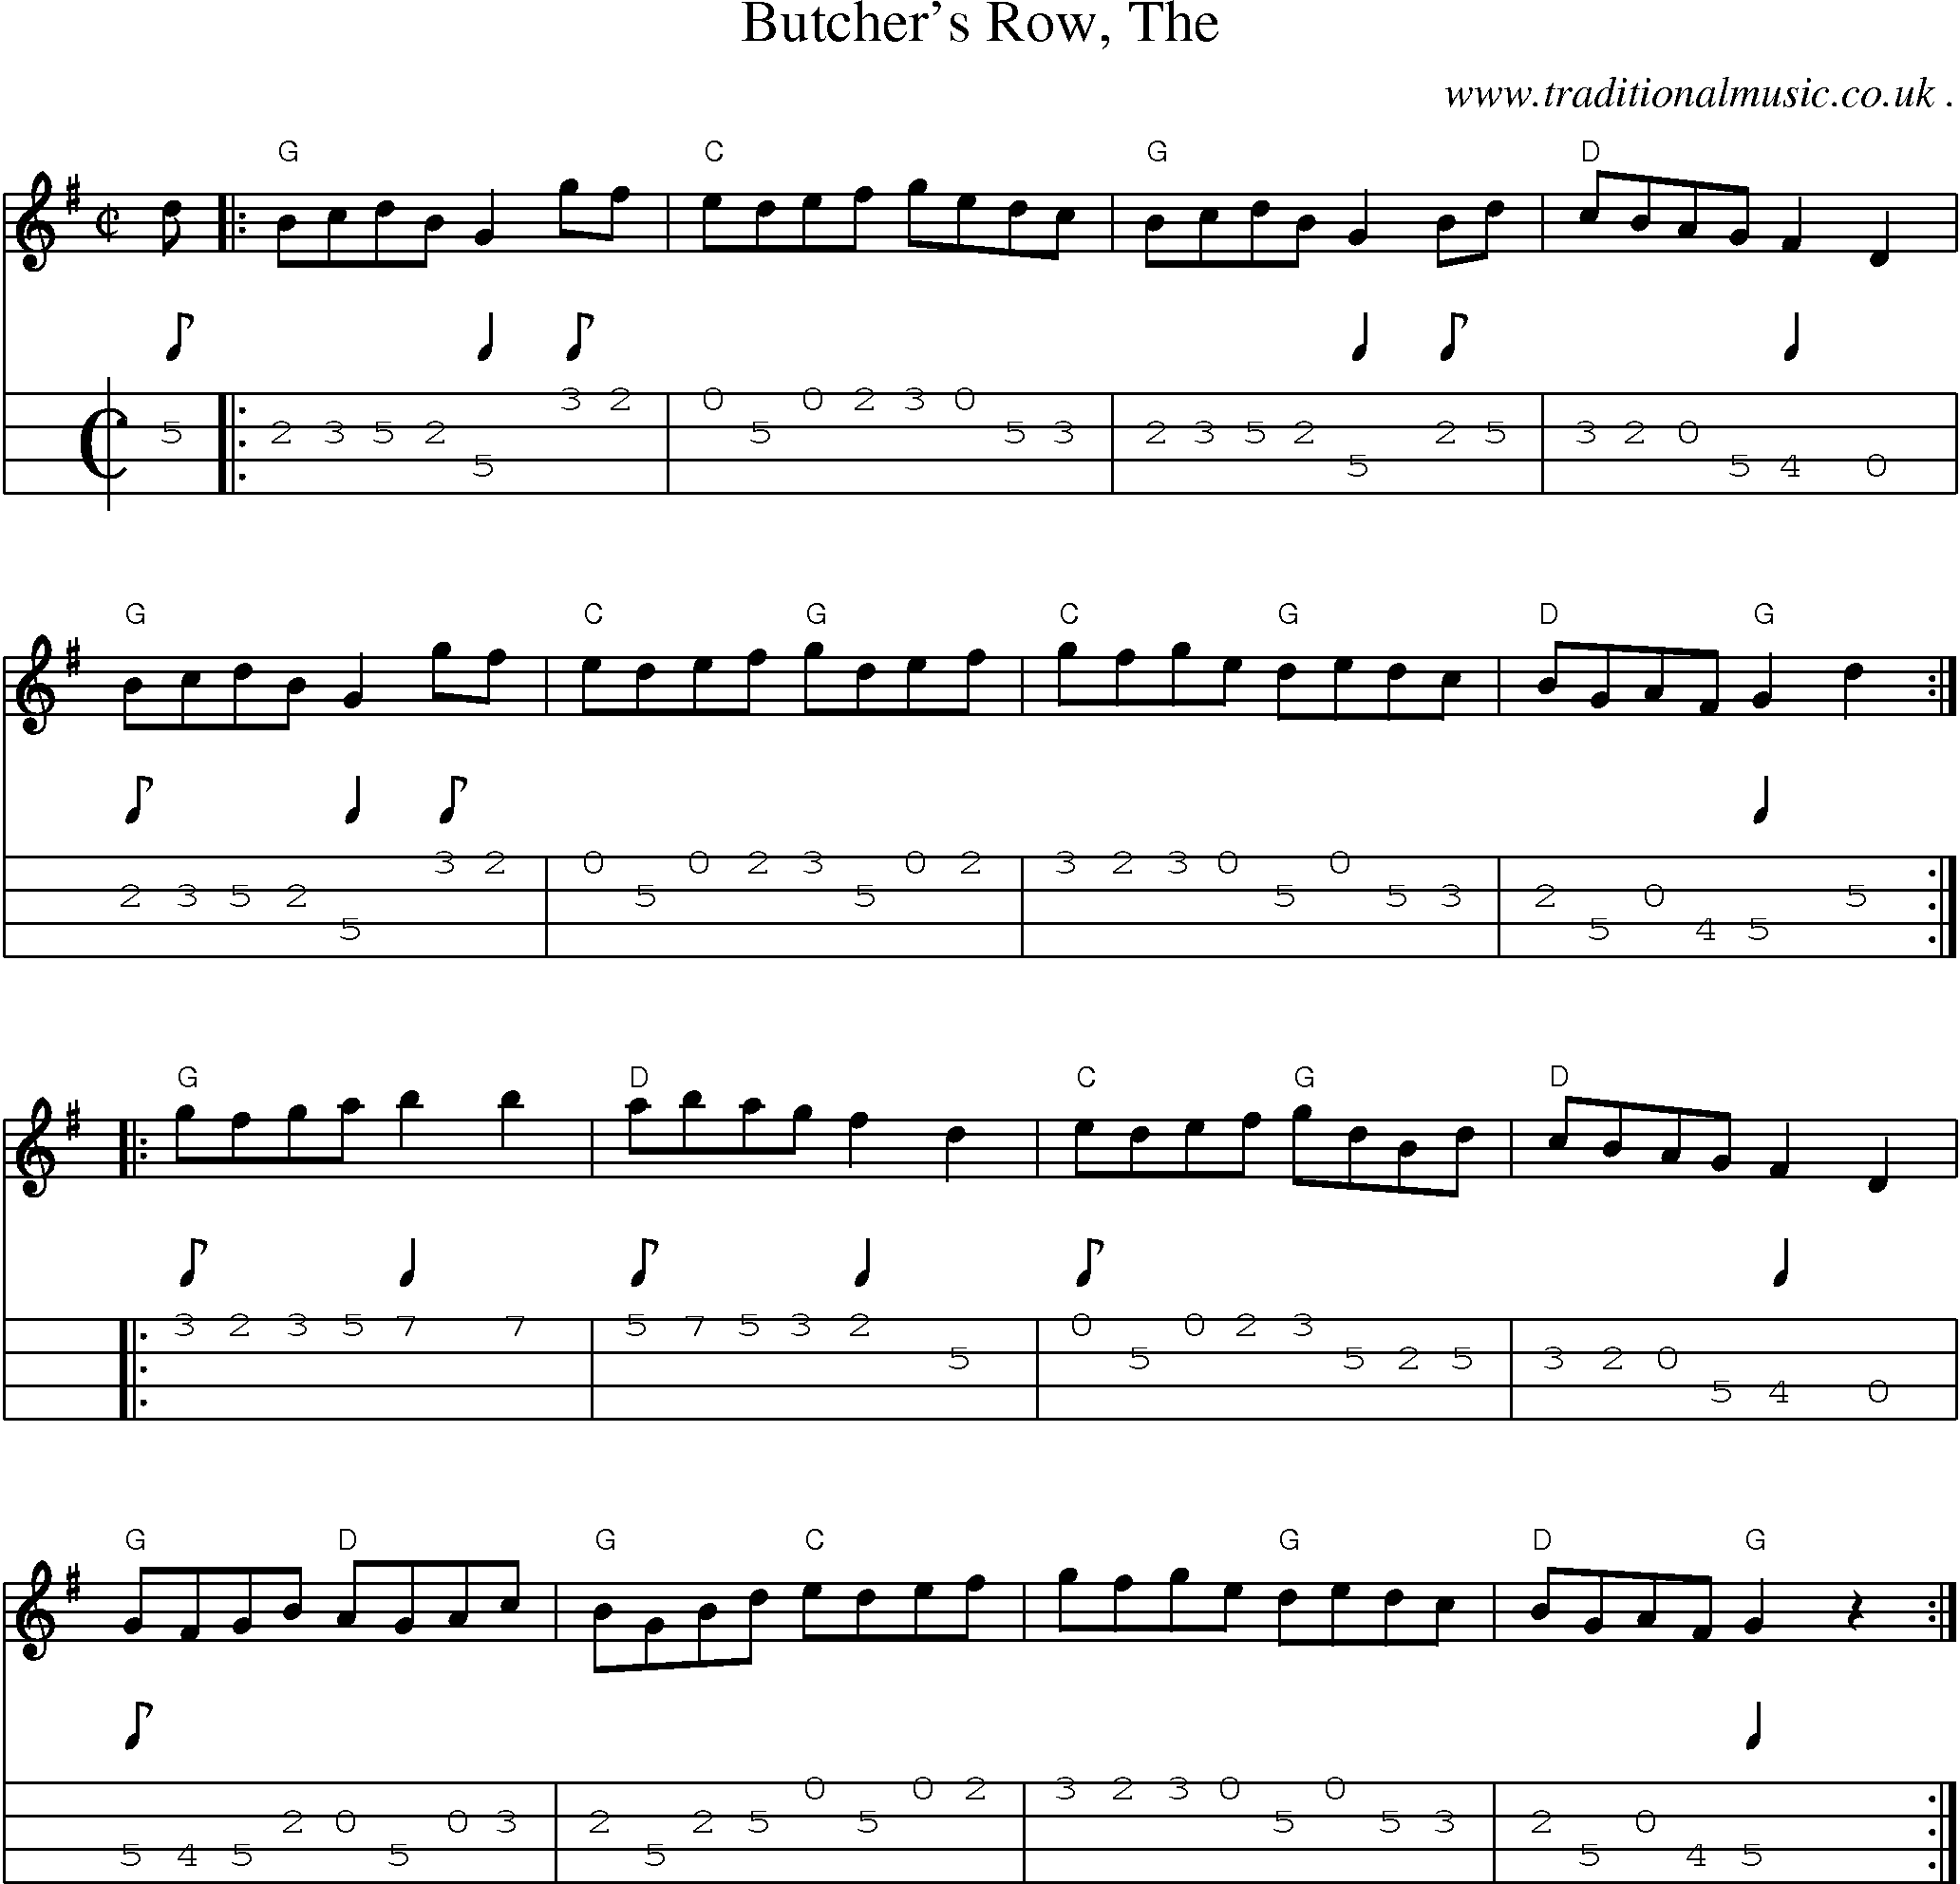 Music Score and Guitar Tabs for Butchers Row The